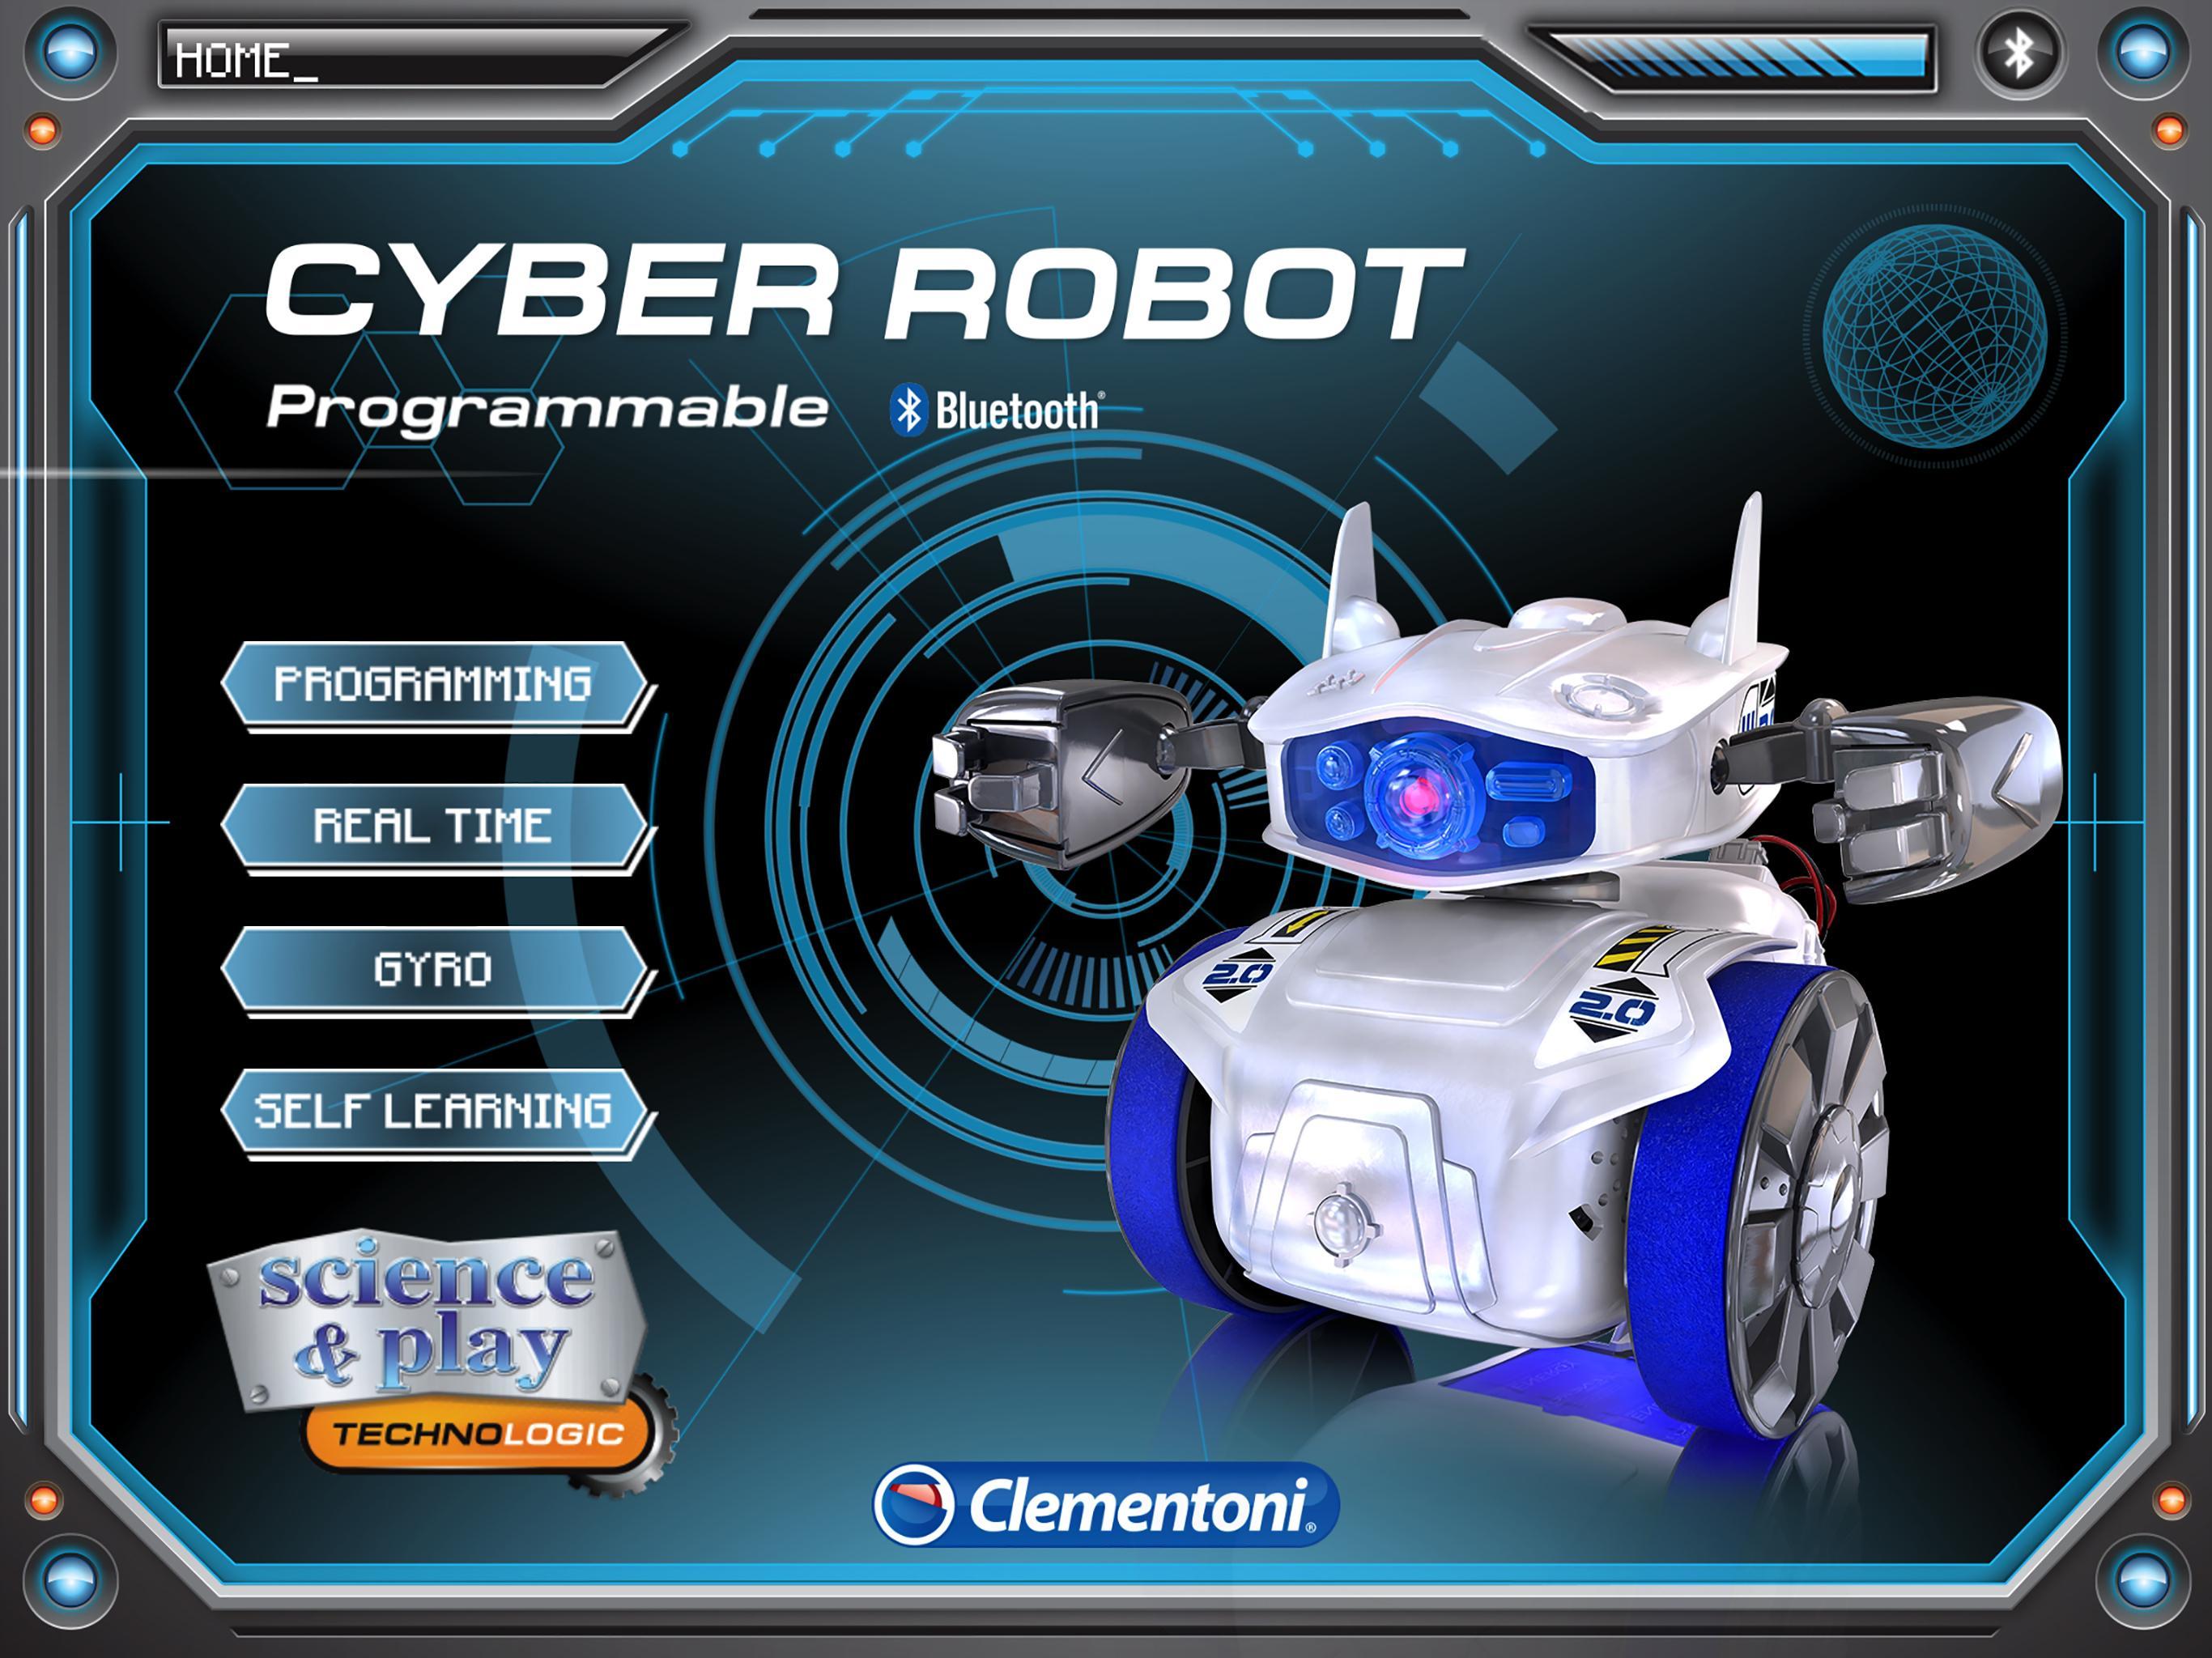 Cyber Robot for Android - APK Download